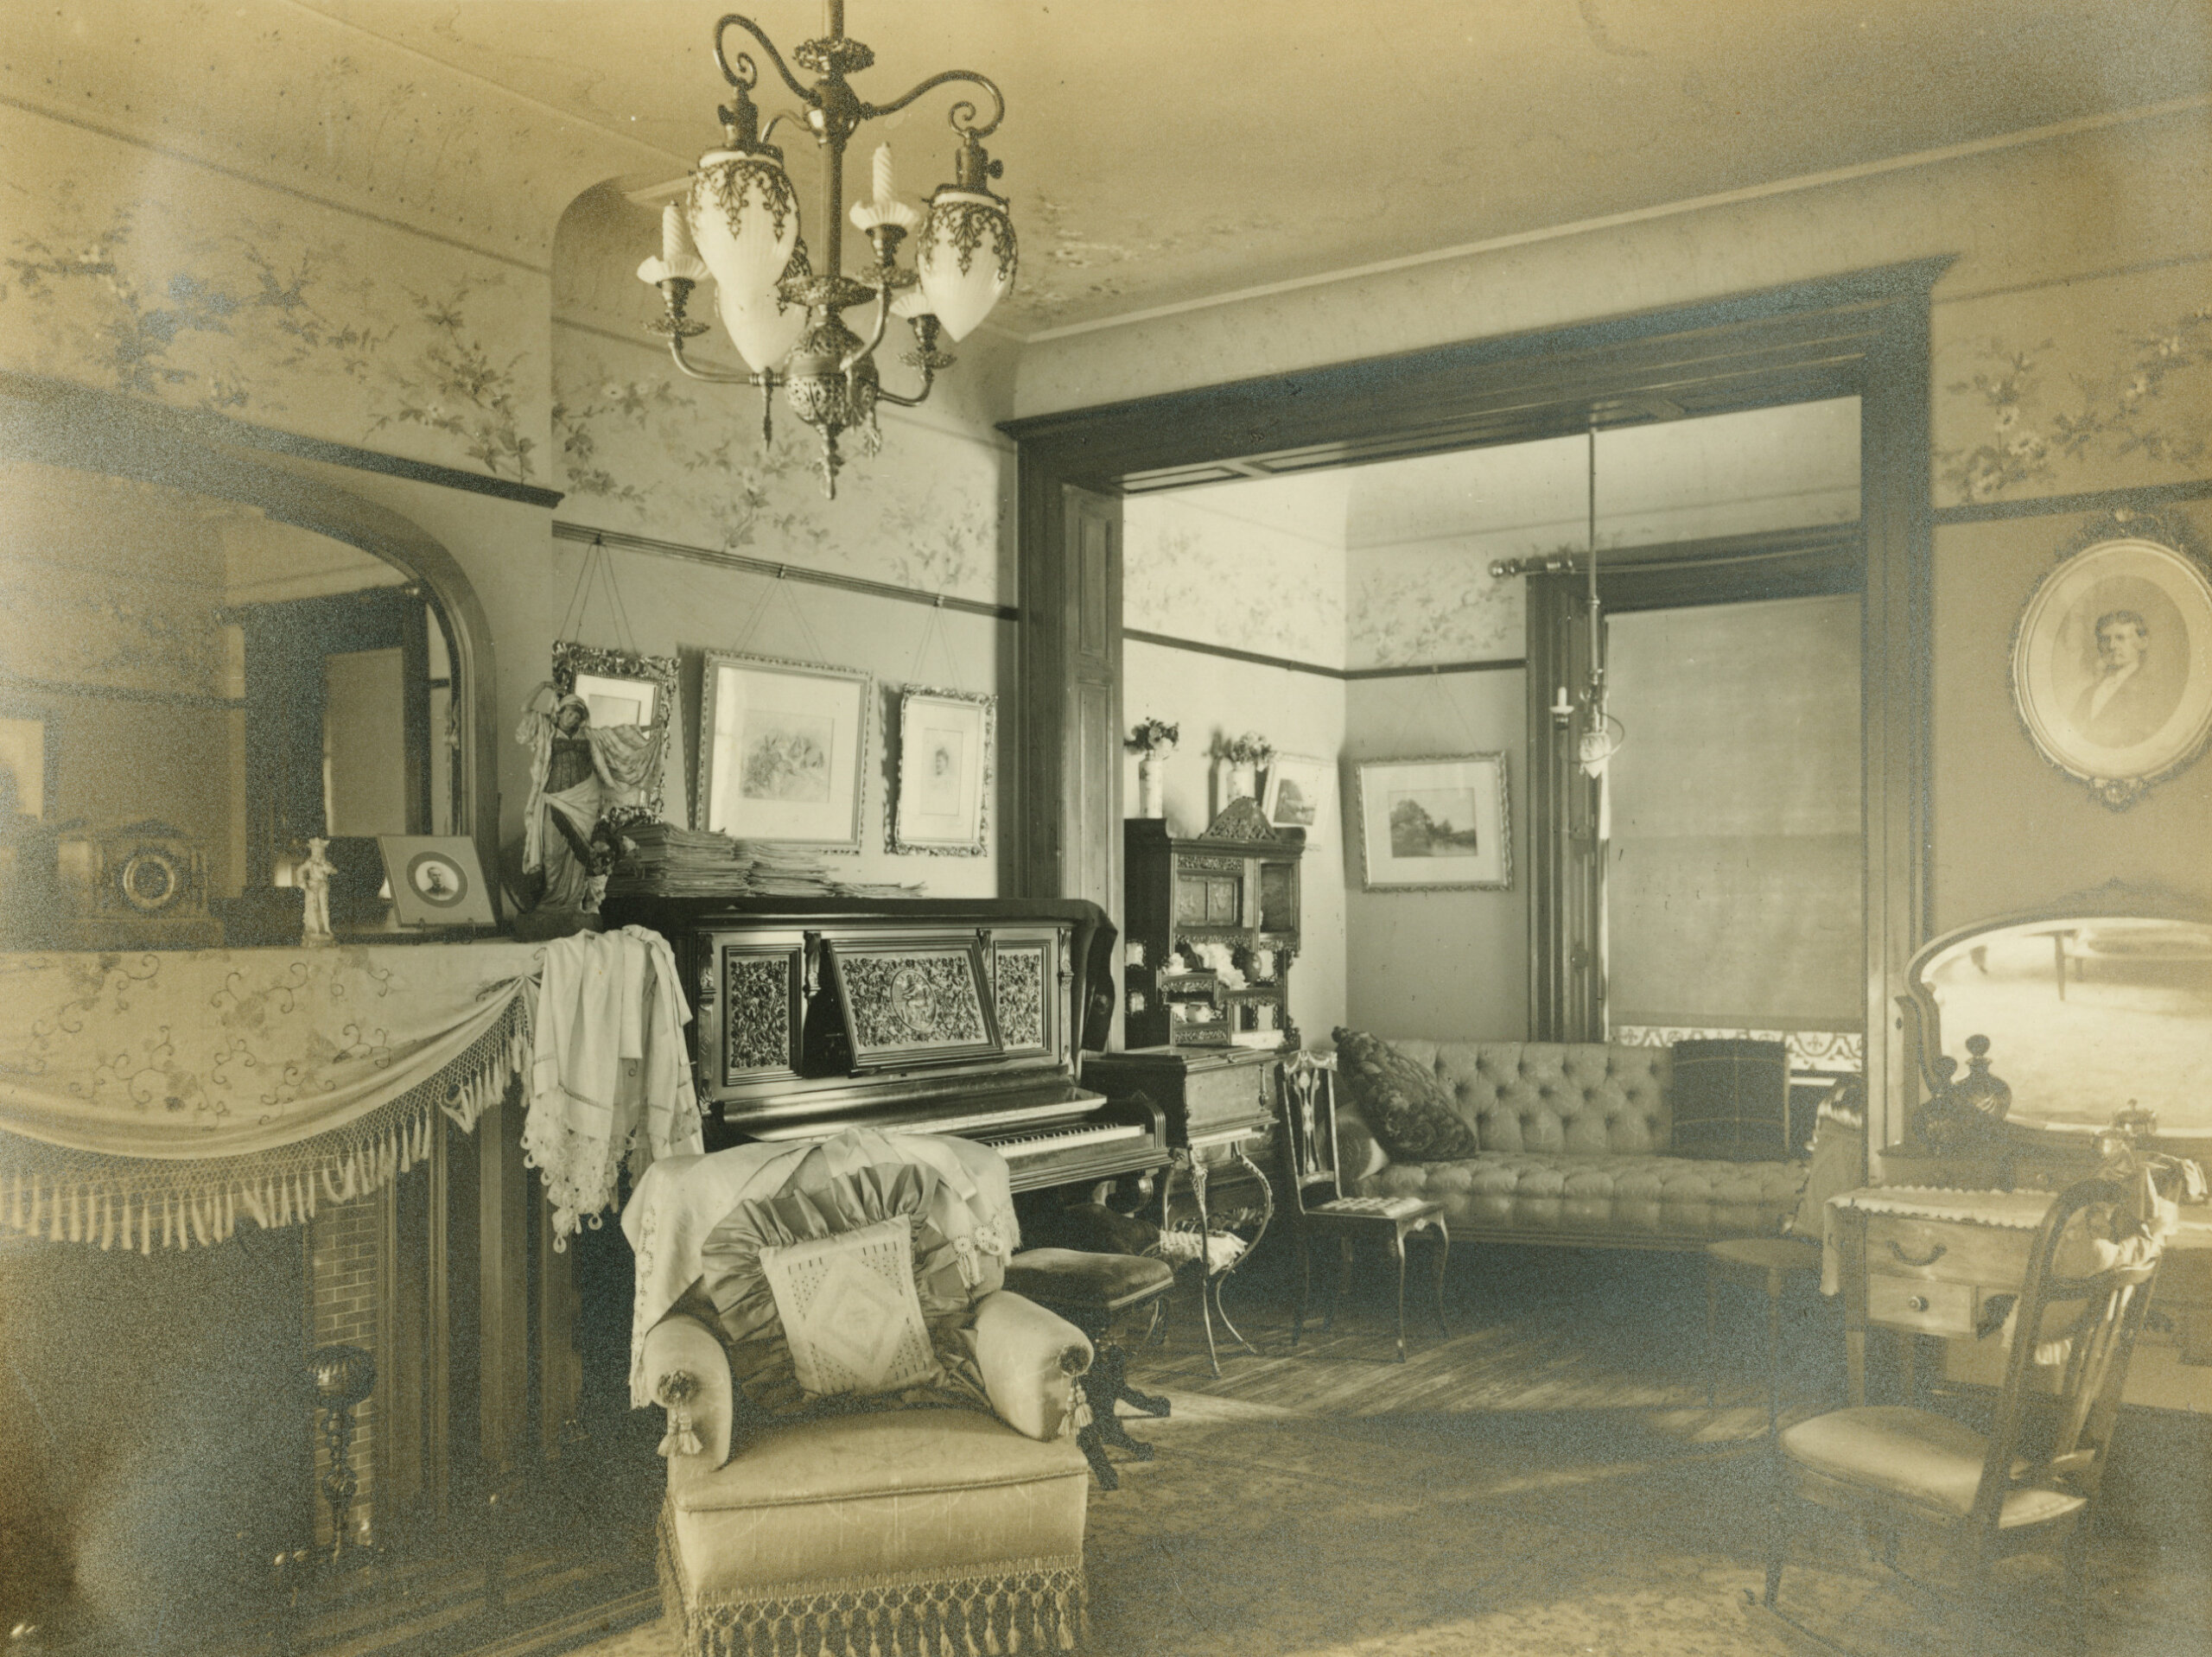 parlor with fabric draped over the mantel next to a piano